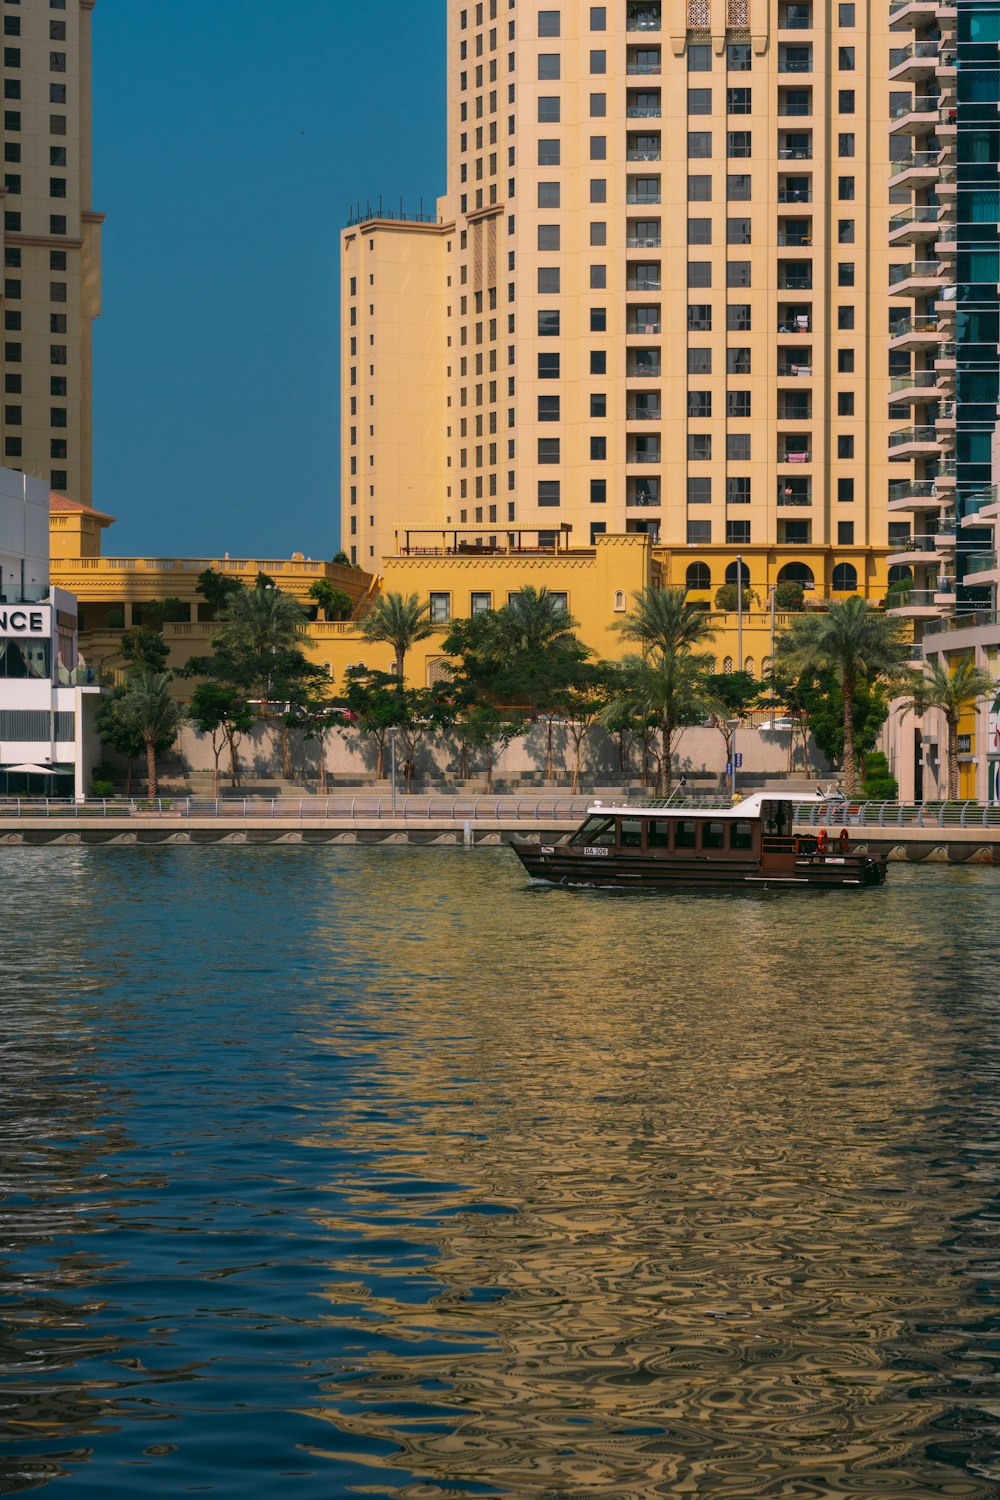 a boat on the water in front of tall buildings